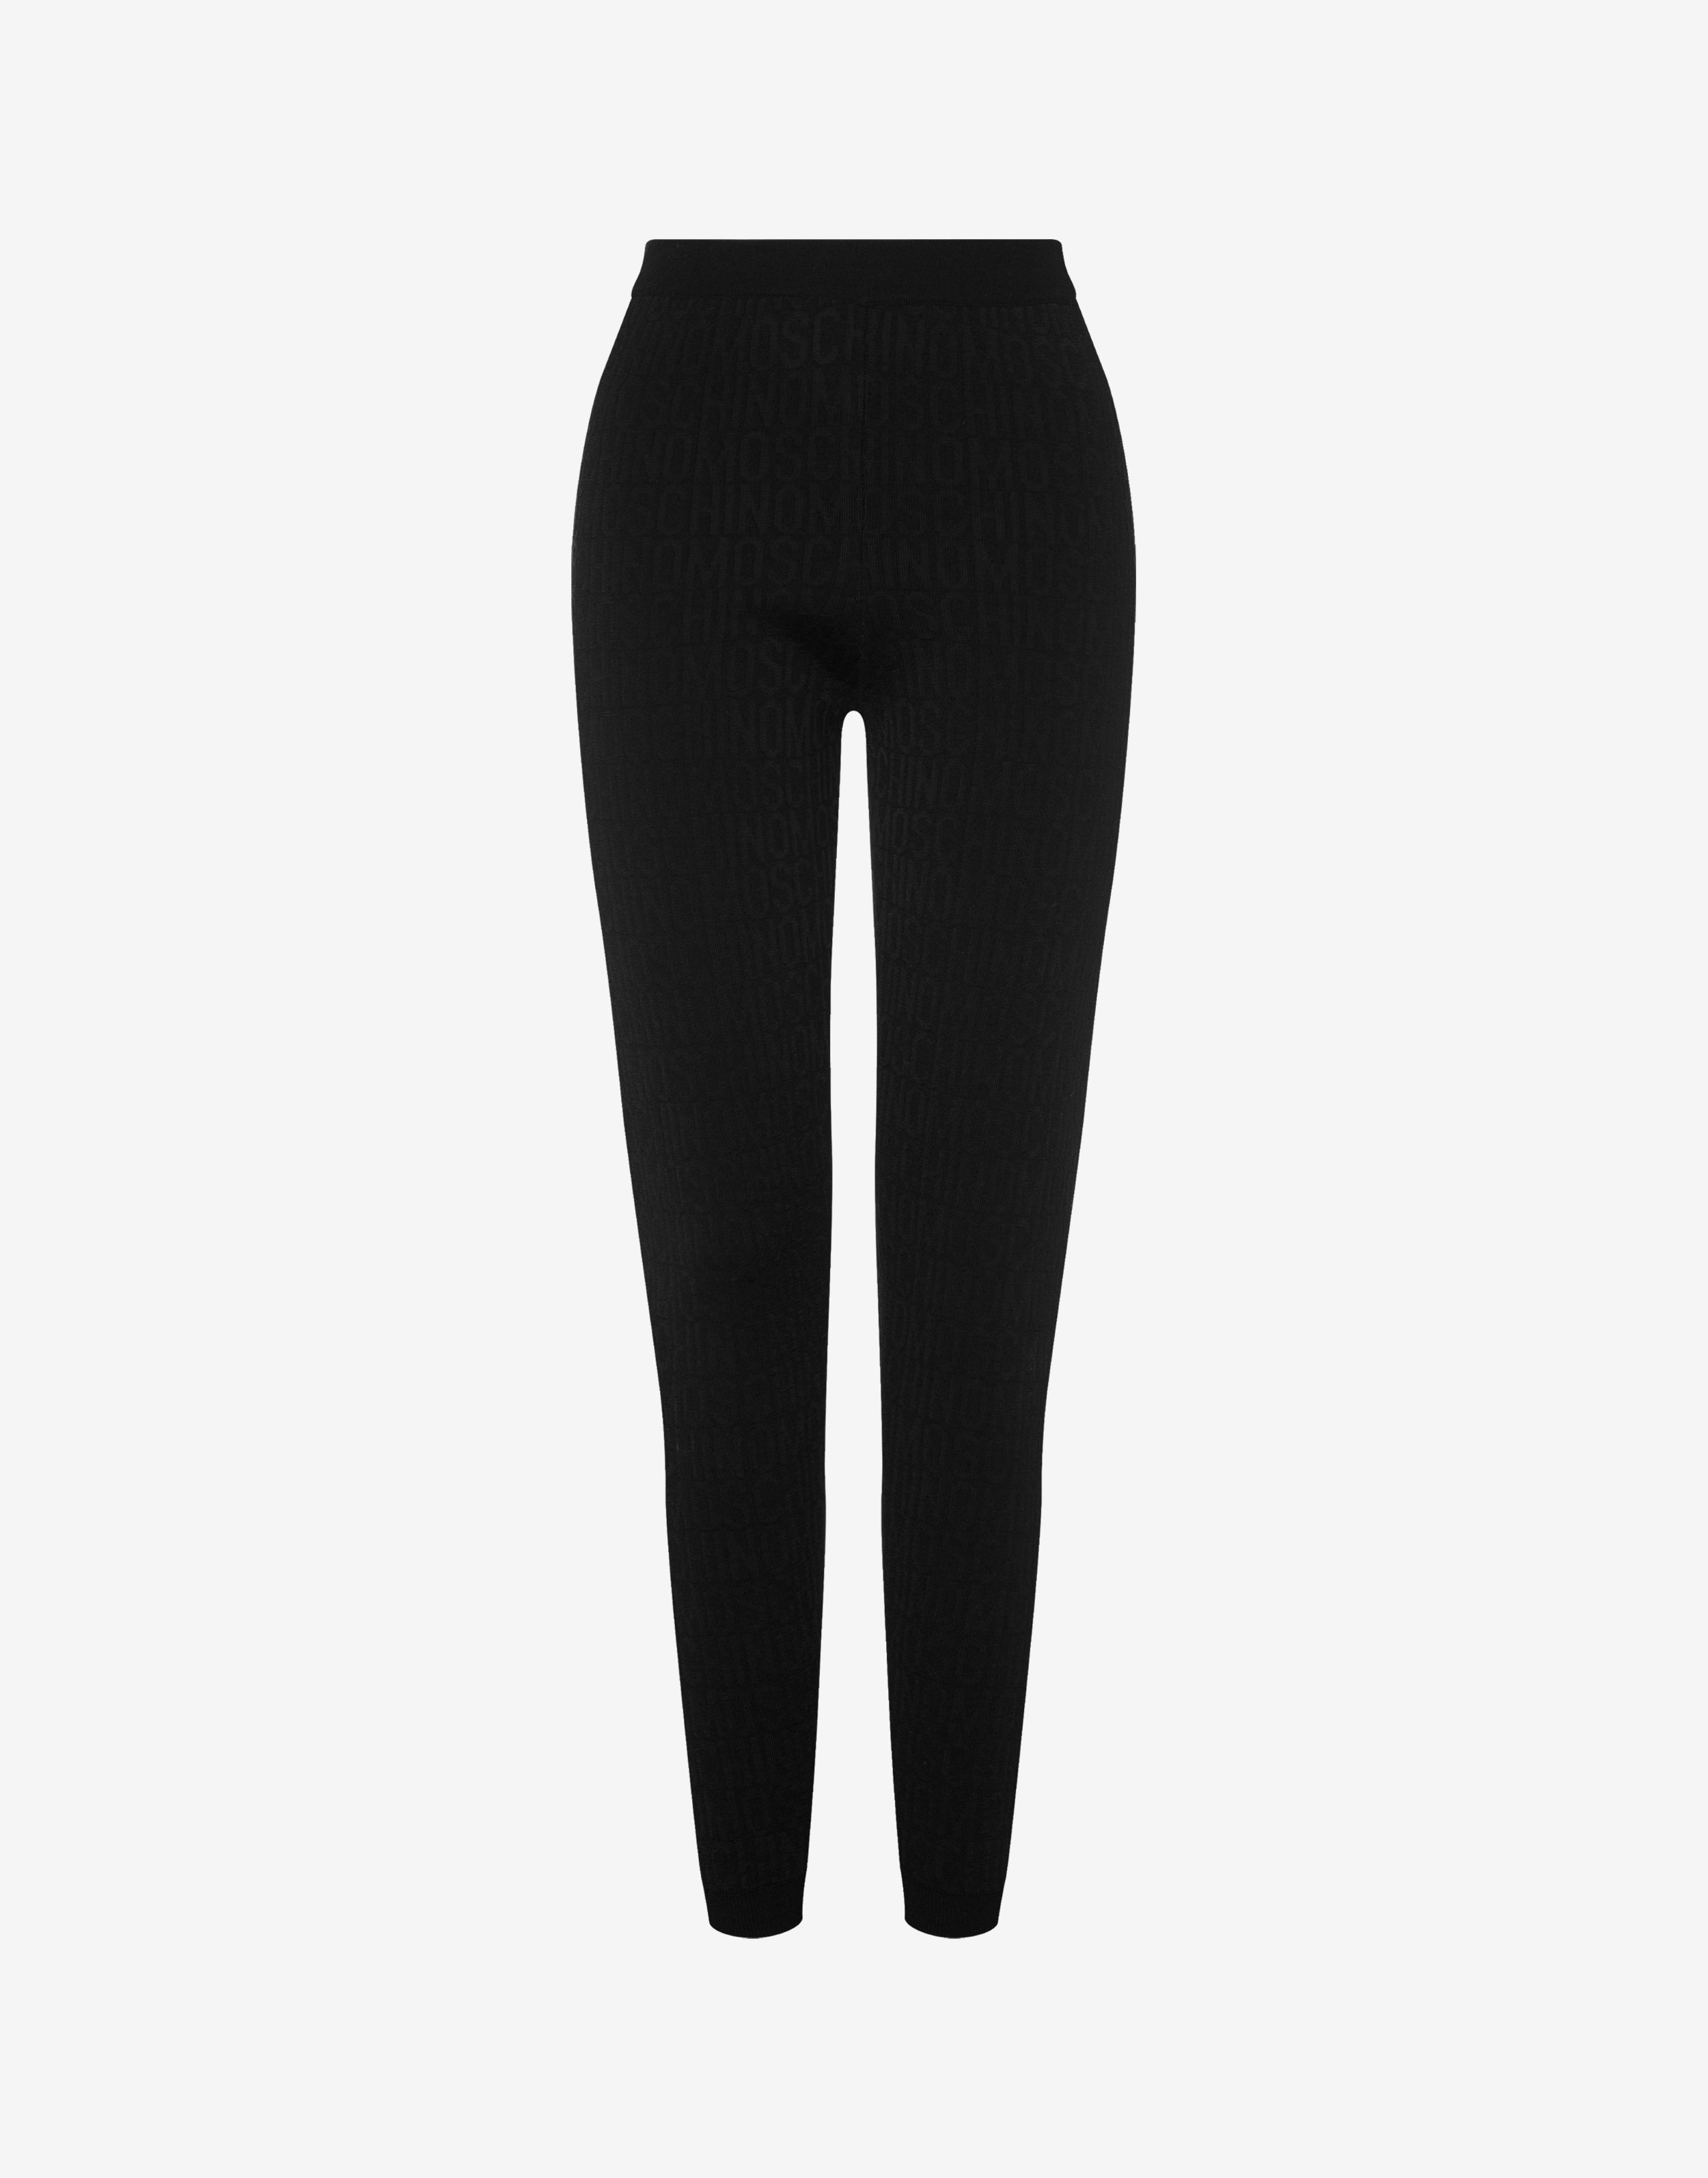 teens in black leggings, teens in black leggings Suppliers and